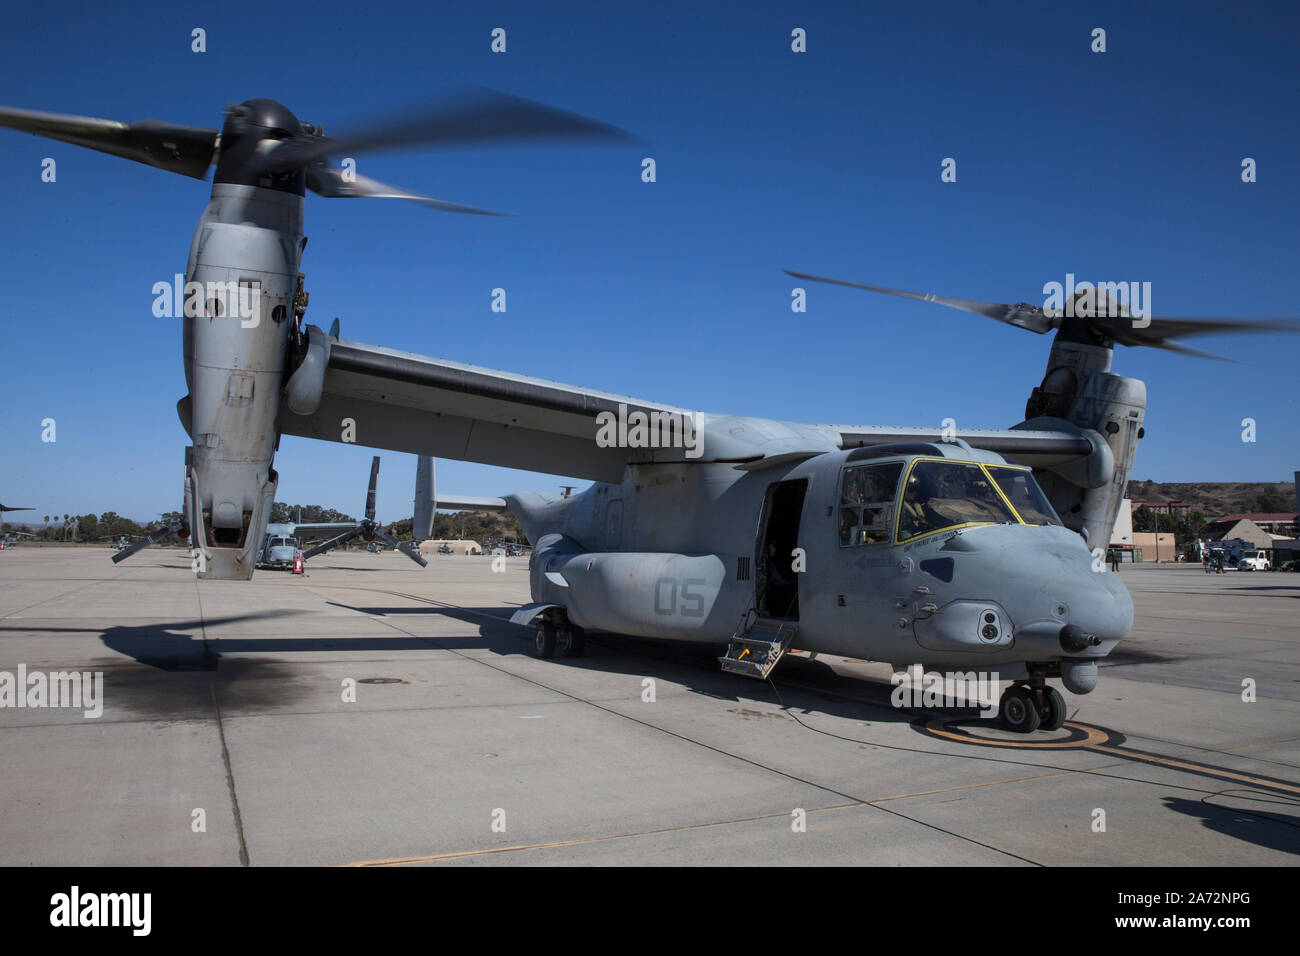 U.S. Marines taxii an MV-22B Osprey into position on Marine Corps Air Station Camp Pendleton, California, Oct. 28, 2019. The air station provides the 1st Marine Expeditionary Force and 3rd Marine Aircraft Wing with flexible deployment options. (U.S. Marine Corps photo by Lance Cpl. Angela Wilcox) Stock Photo